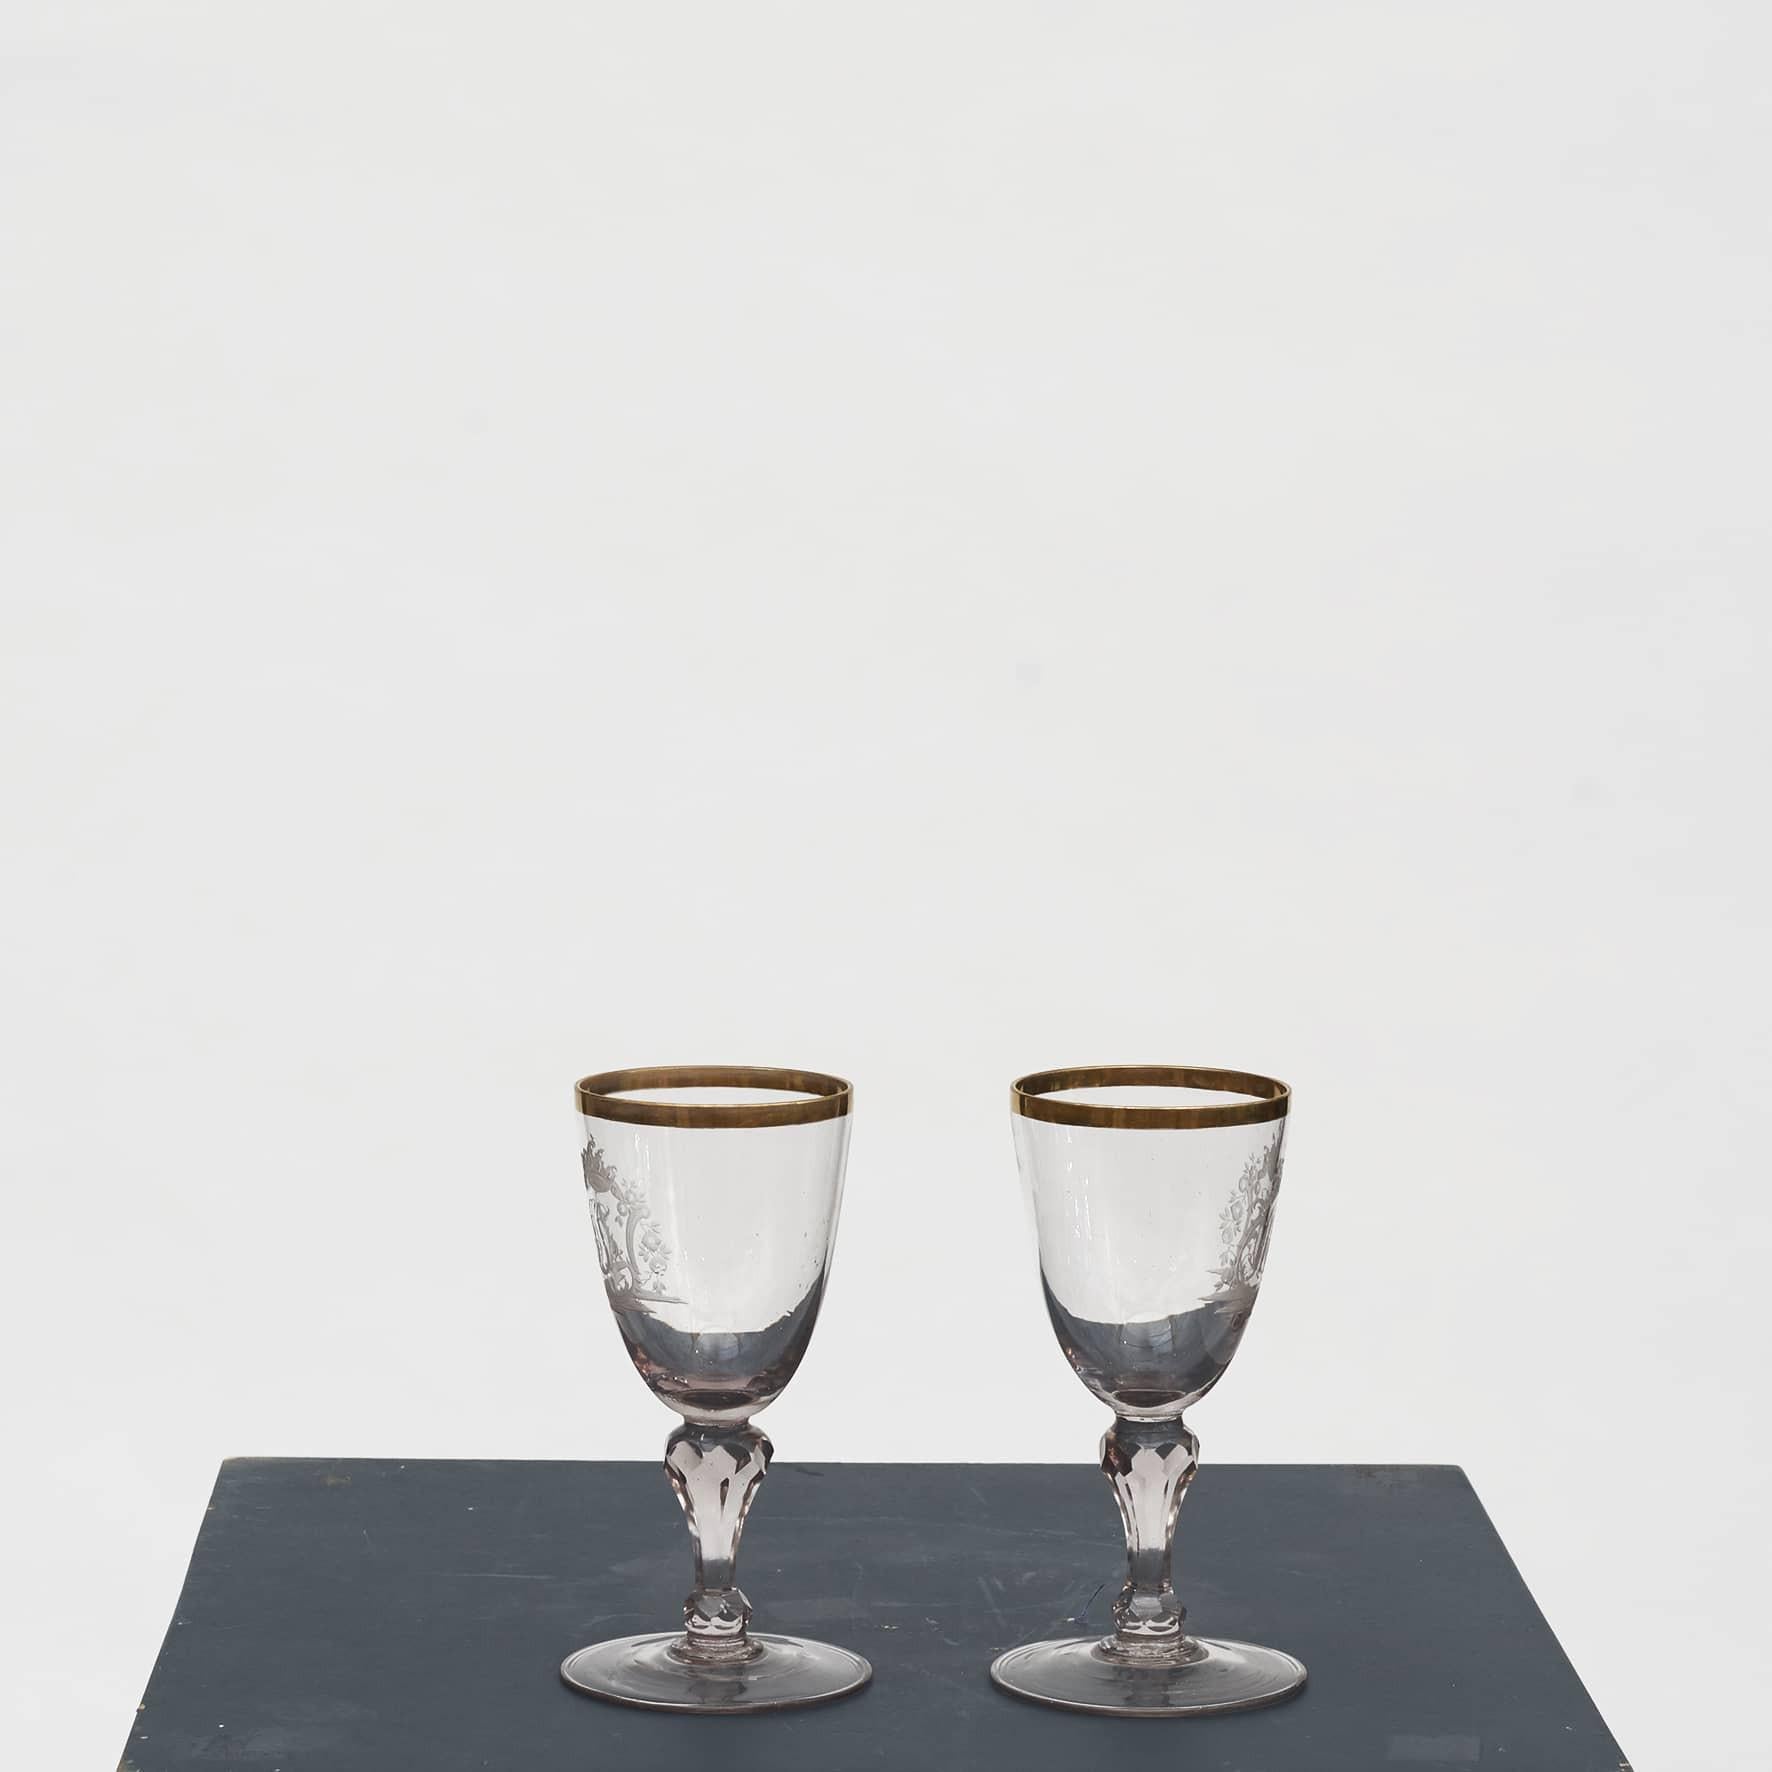 Pair of hand-blown baroque wine glasses engraved with monogram and scrollwork. Gold rimmed and facet cut stem.
The glasses probably originate from Germany, Mid-18th Century.

In fine condition.
Sold as a pair.